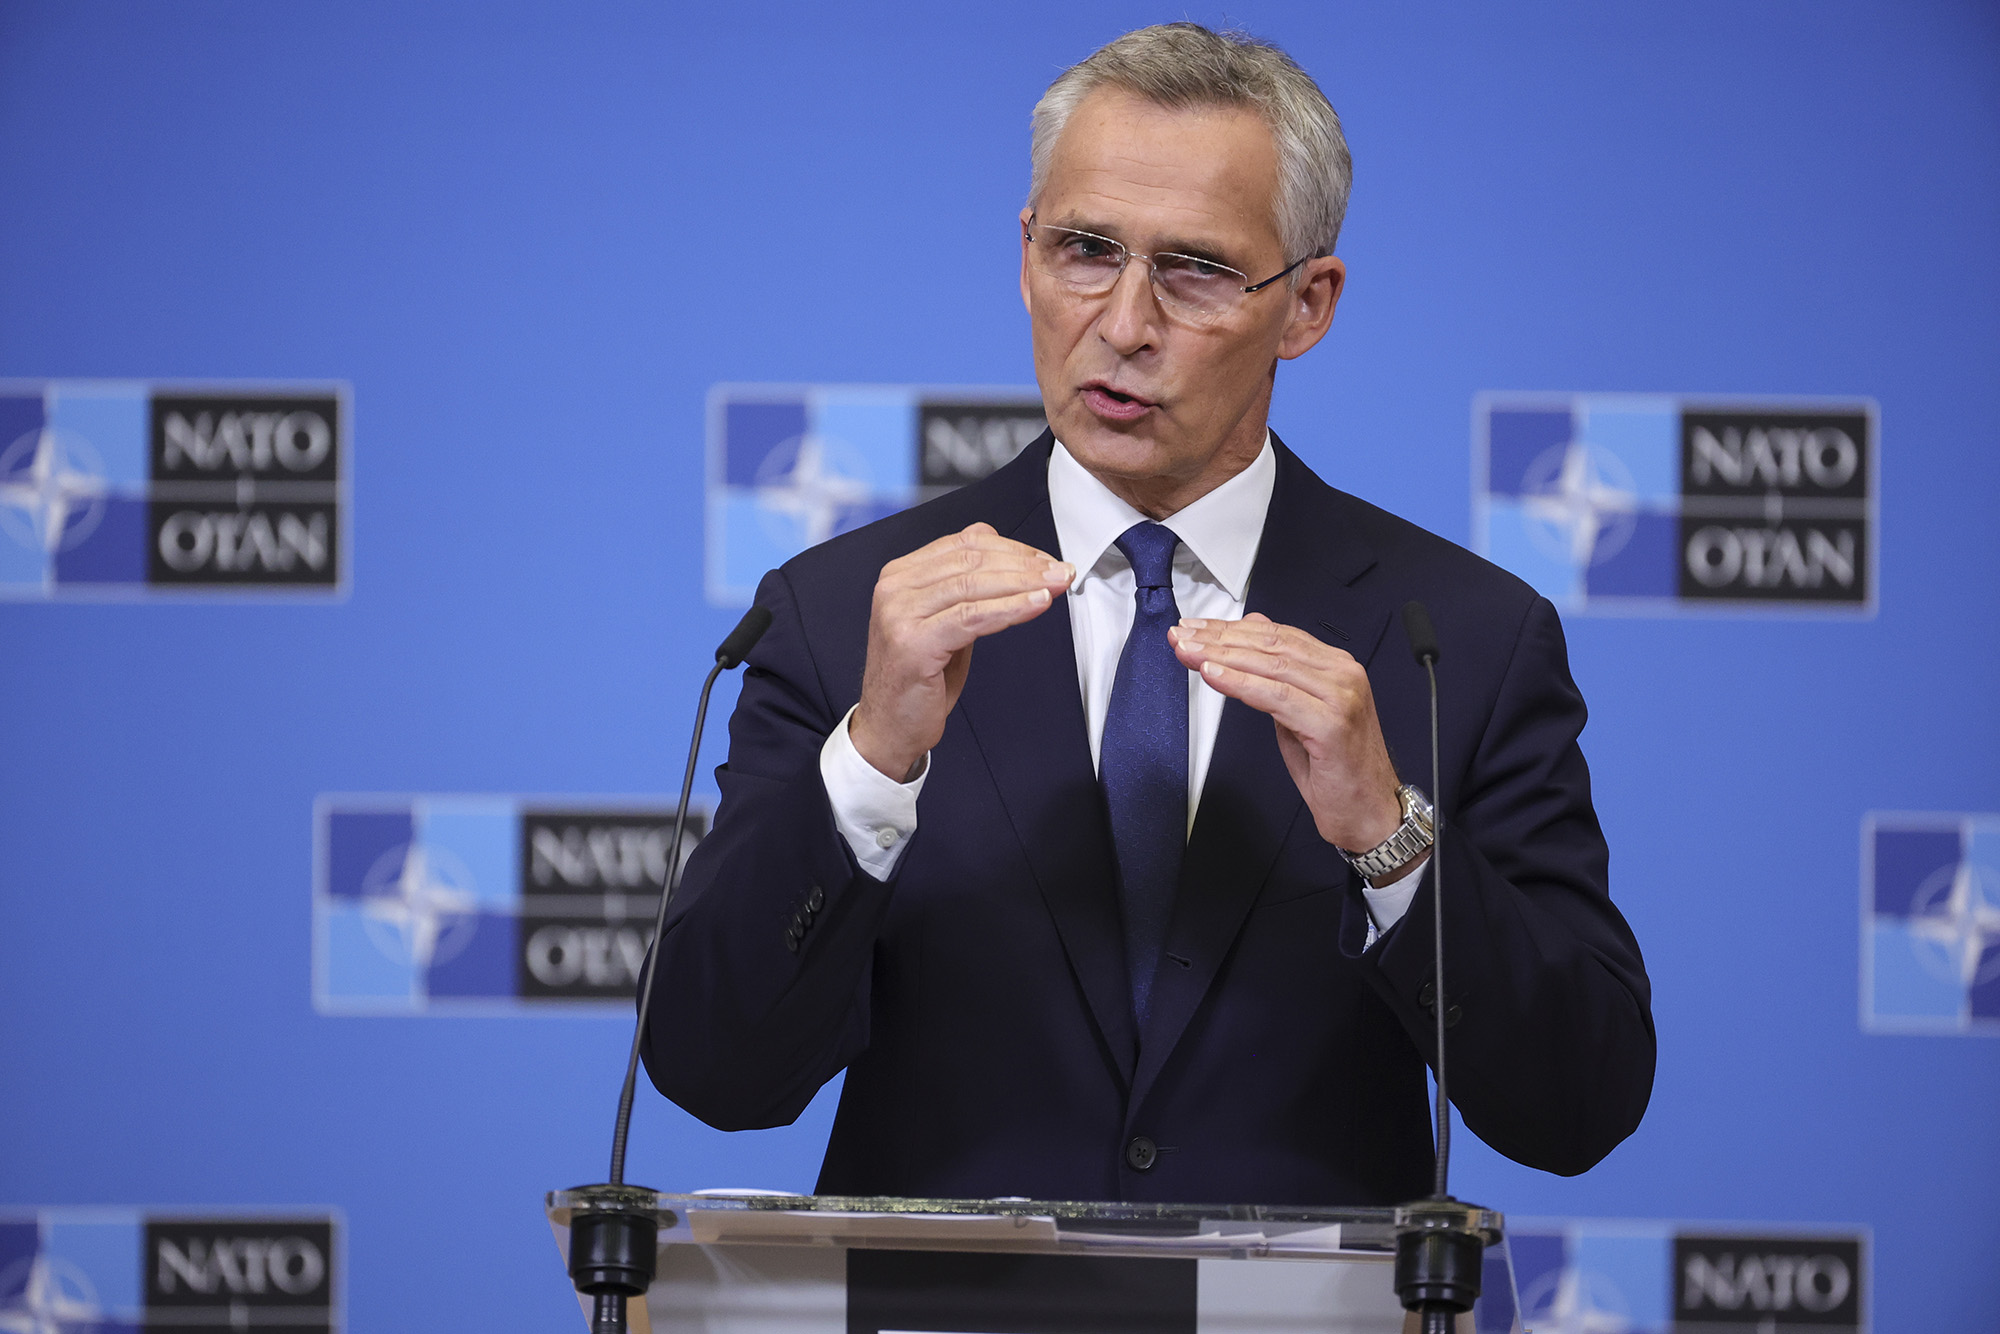 NATO Secretary-General Jens Stoltenberg holds a press conference at the NATO headquarters in Brussels, Belgium, on October 11.